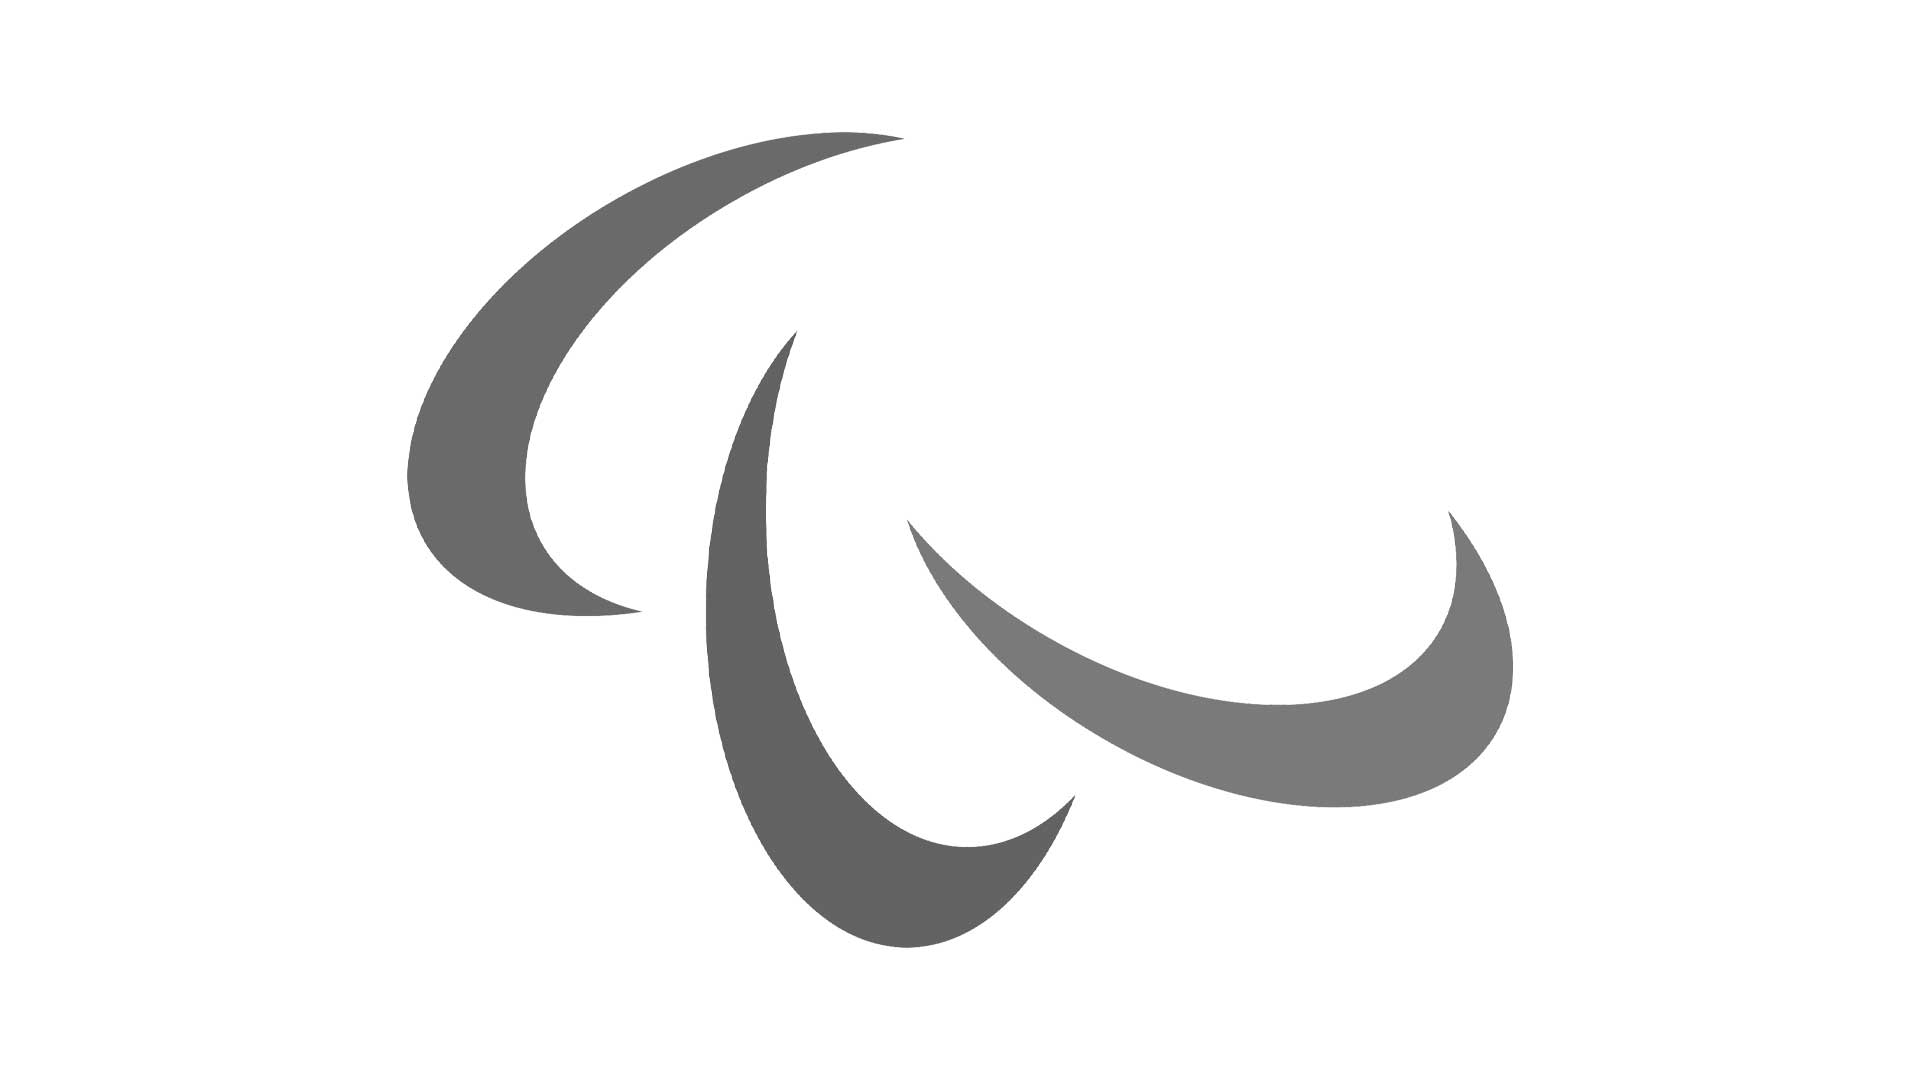 Paralympics logo in black and white